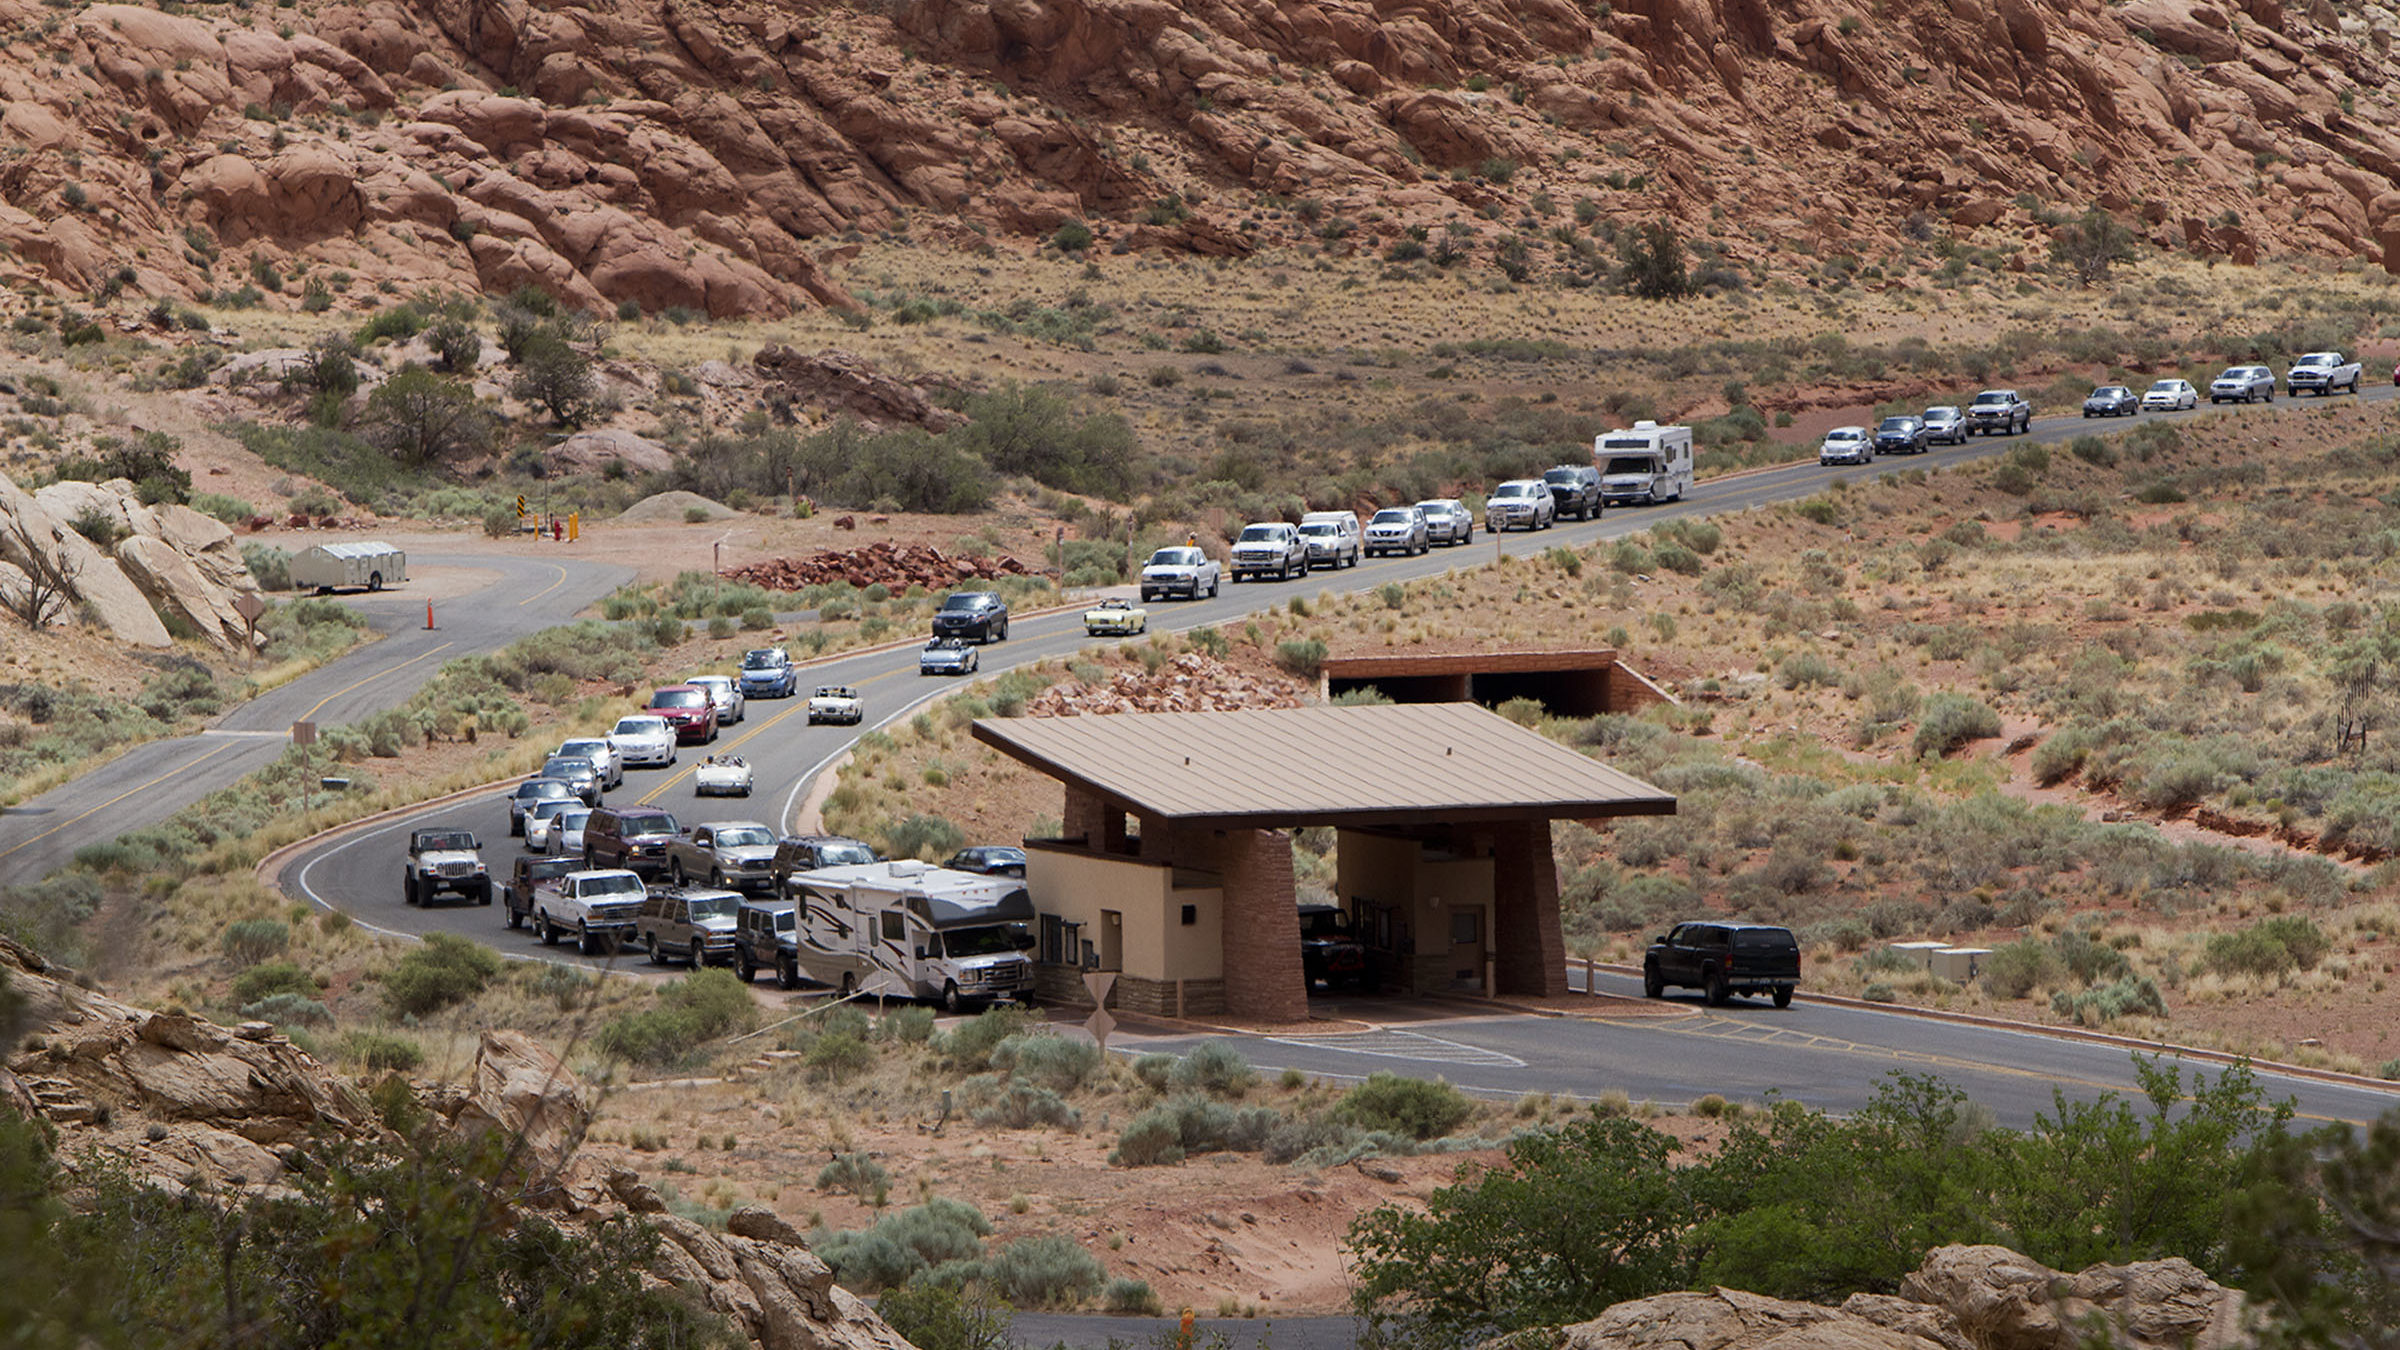 Cars line up at an entrance, memorial day weekend travel is expected to cause traffic build up....